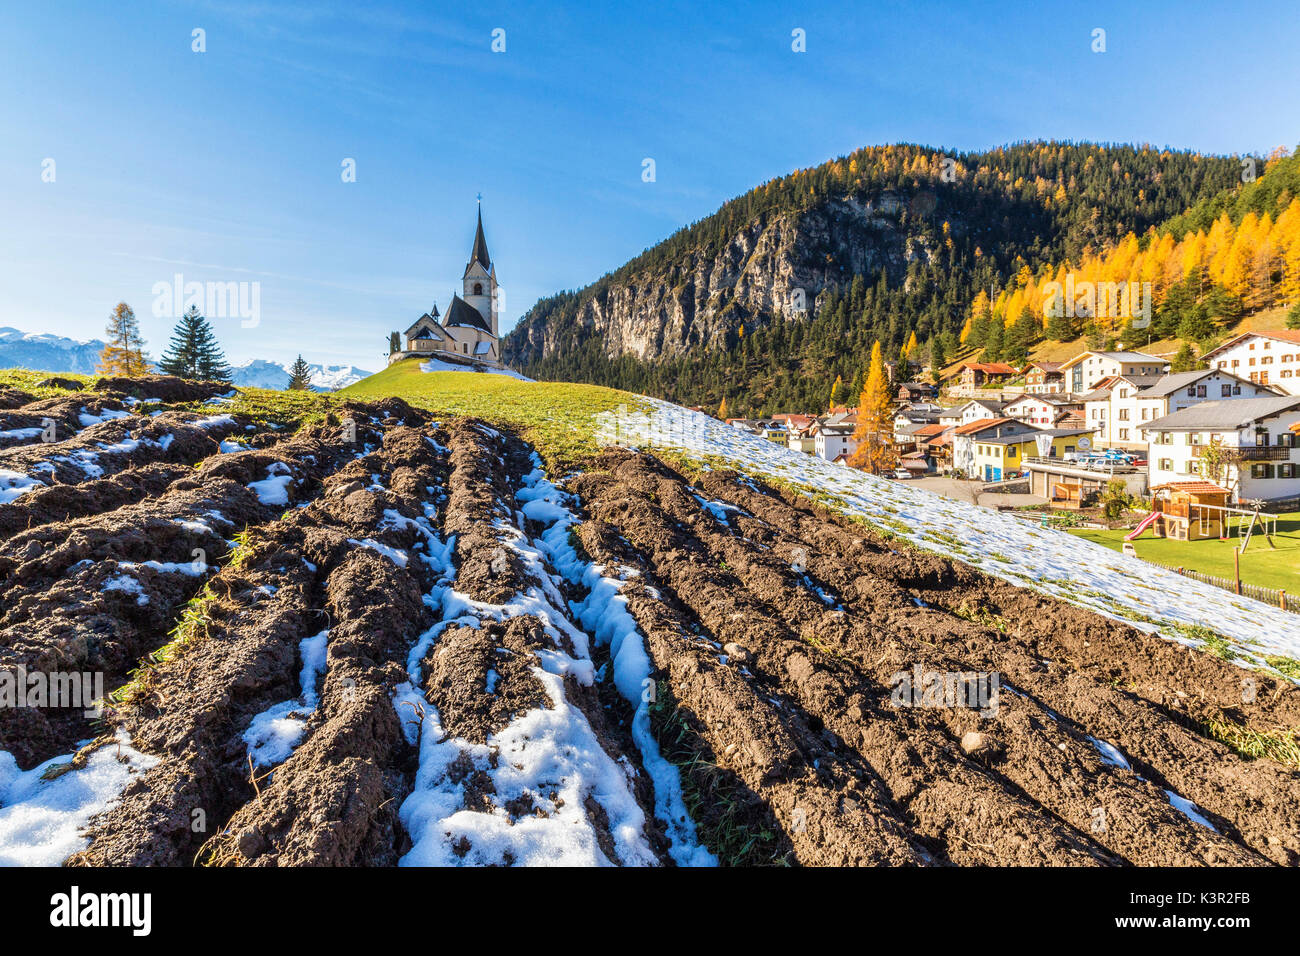 The church of Schmitten surrounded by colorful woods and snow Albula District Canton of Graubünden Switzerland Europe Stock Photo